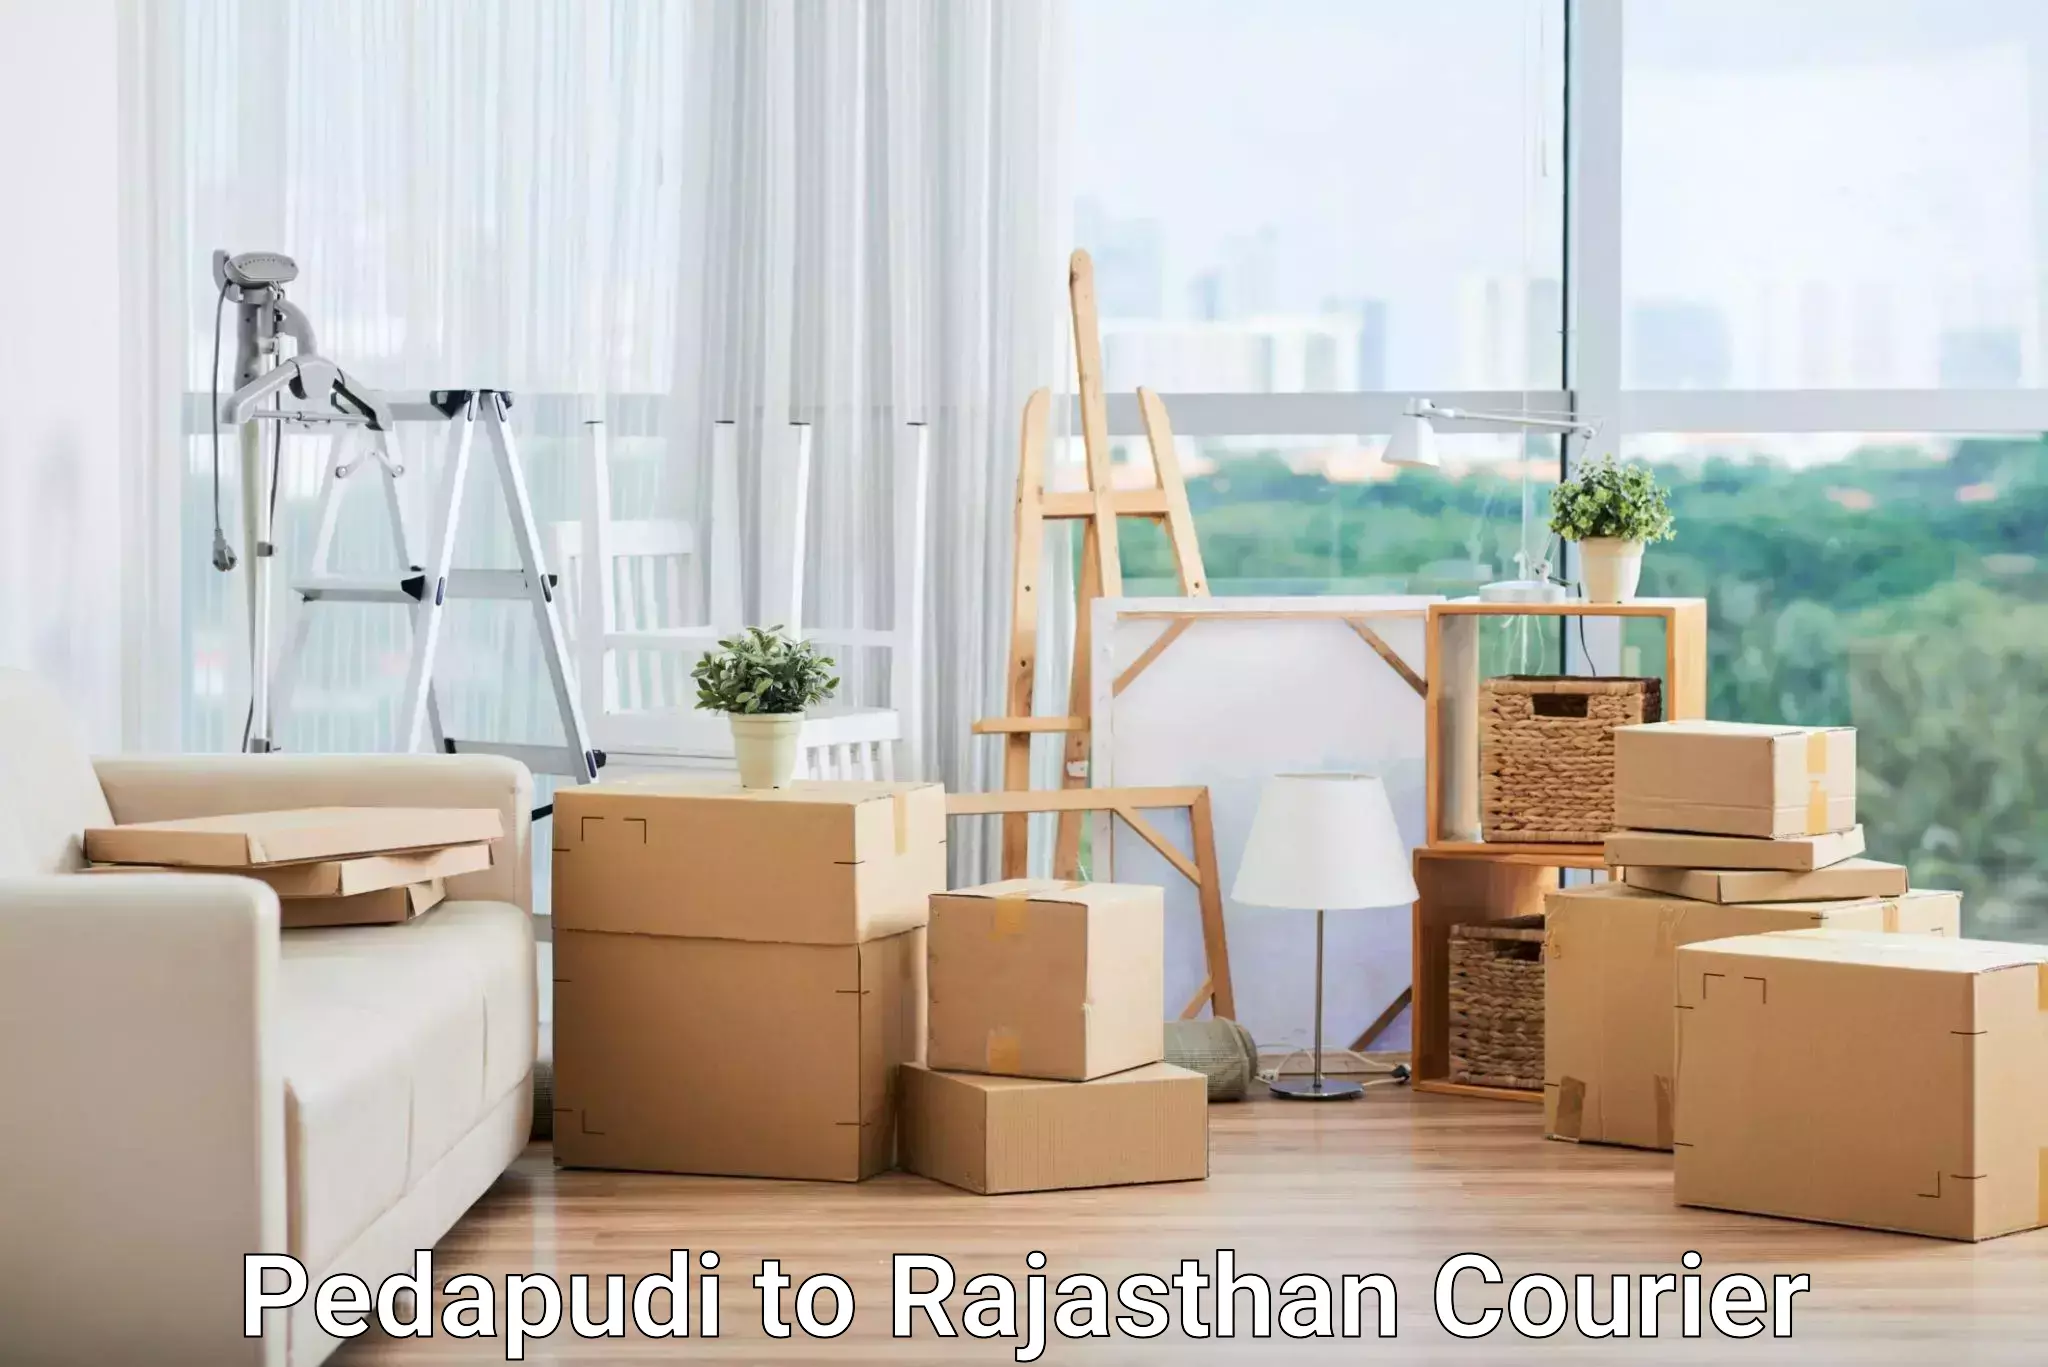 High-priority parcel service Pedapudi to Rajasthan